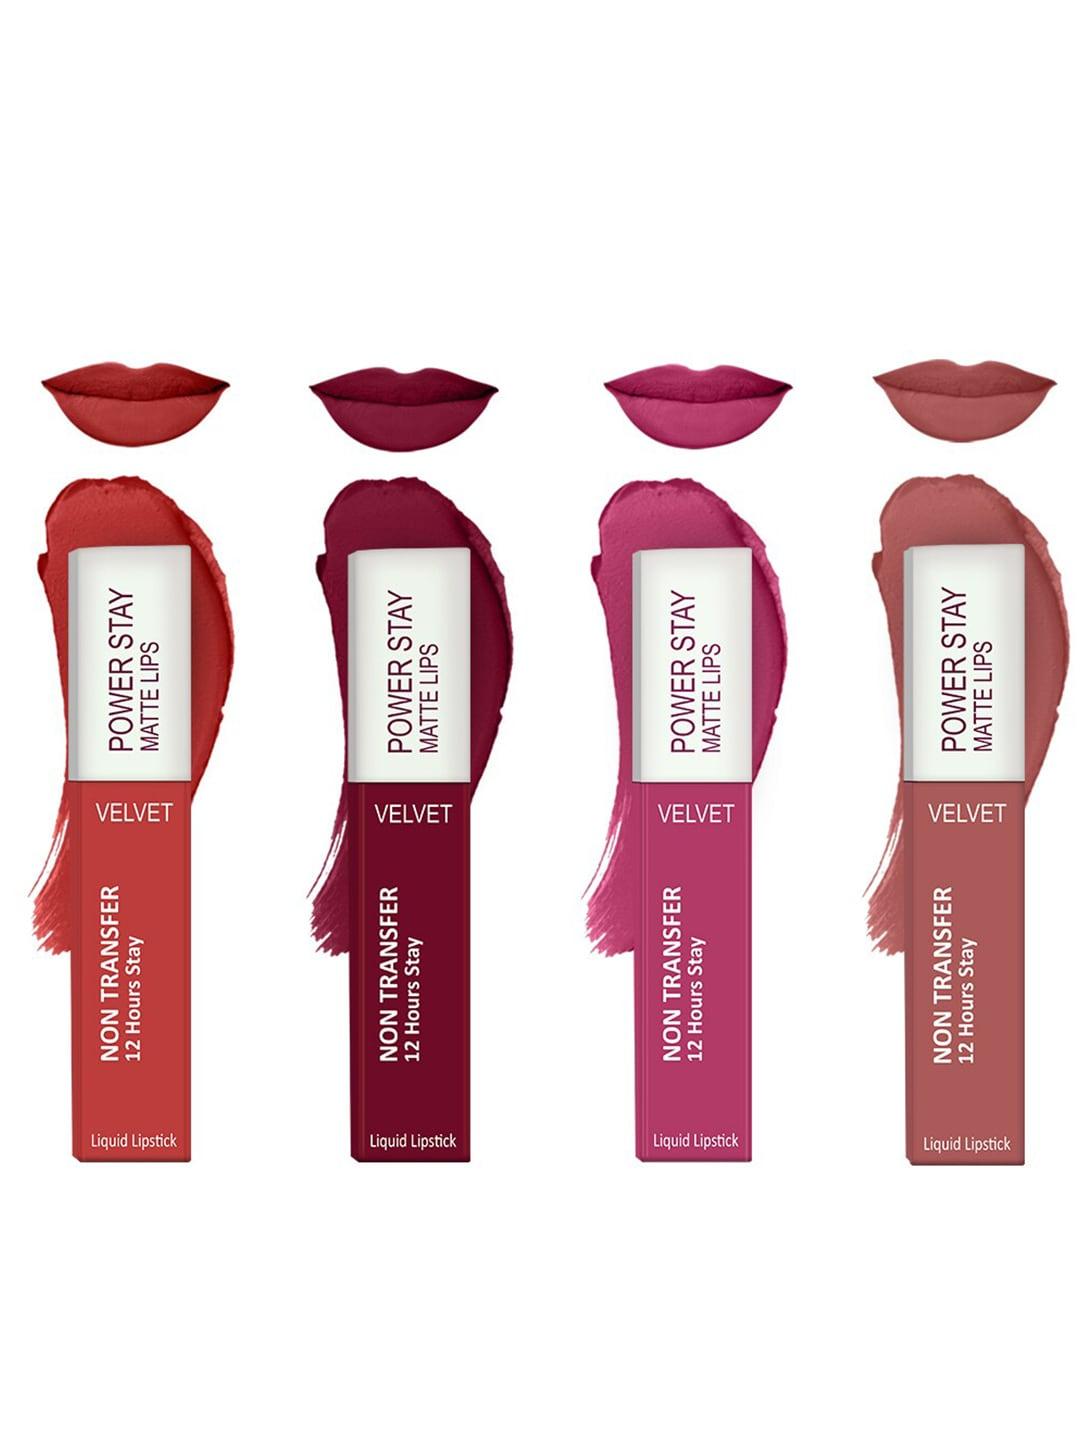 Forsure Set of 4 Power Stay Matte Lips Non-Transfer 12 Hours Stay Velvet Matte Liquid Lipstick - Bright Red 01 - Cherry Maroon 09 - Pink Blush 10 - Peach Nude 21